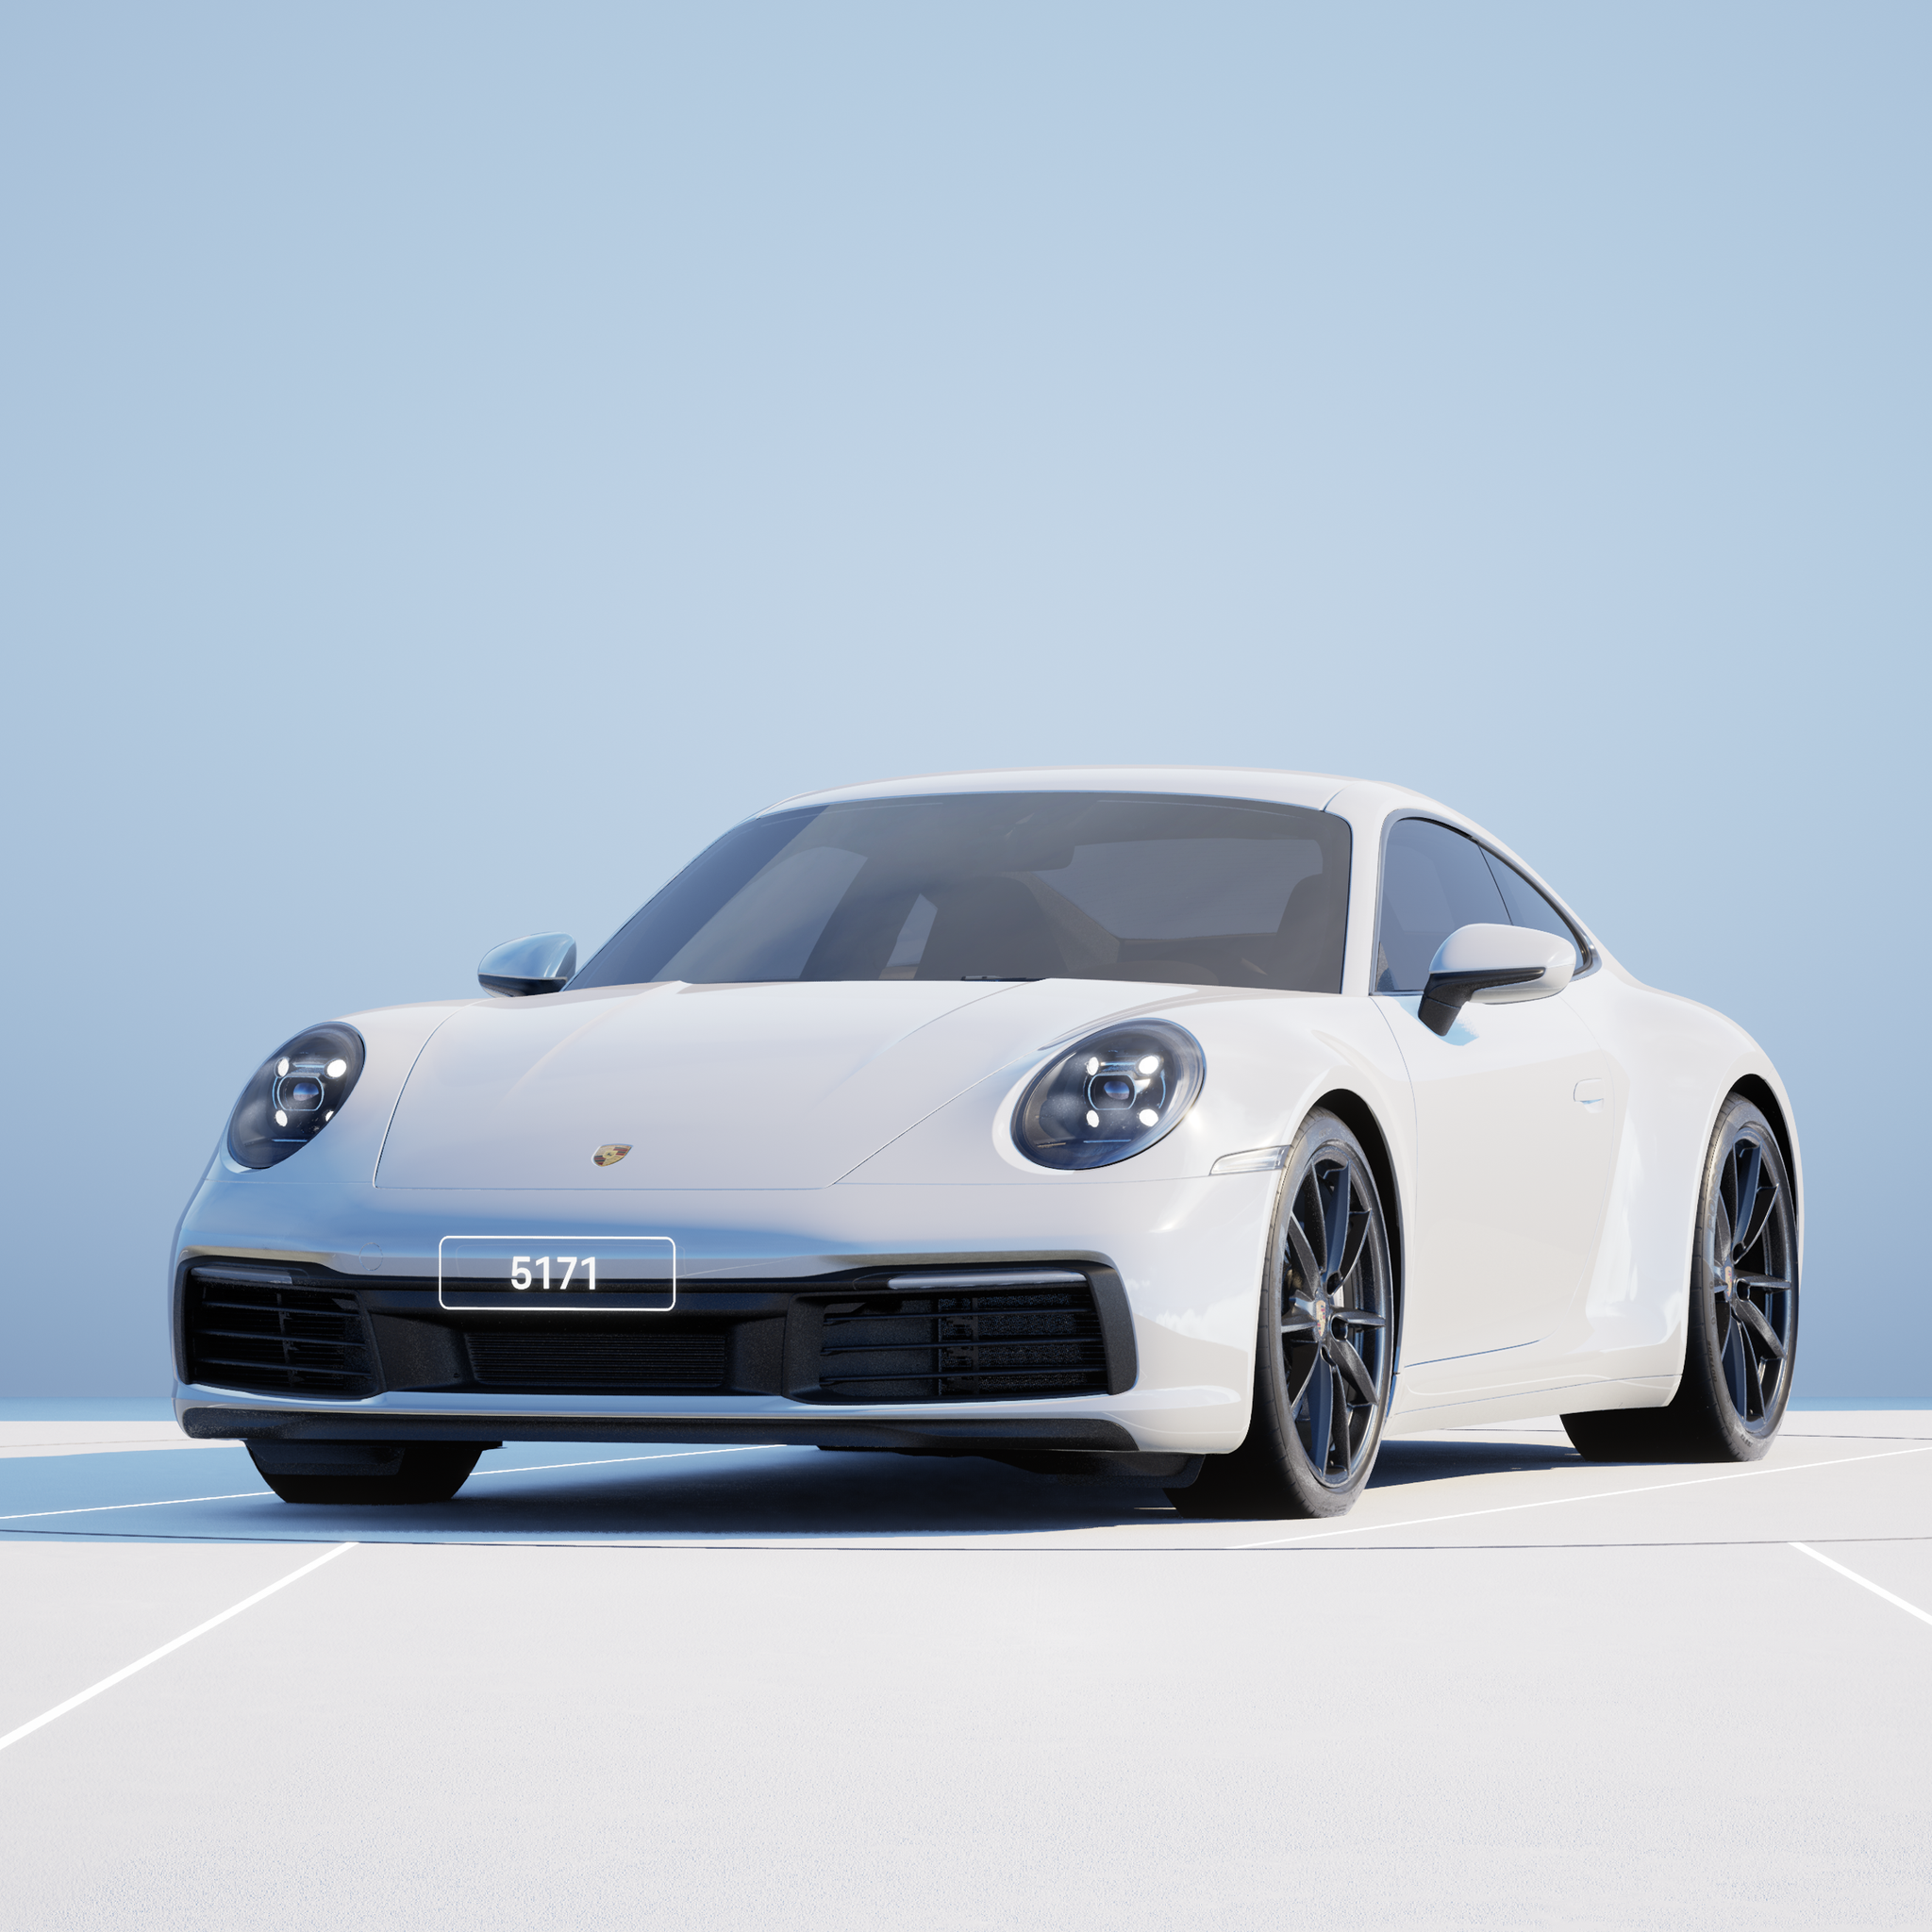 The PORSCHΞ 911 5171 image in phase